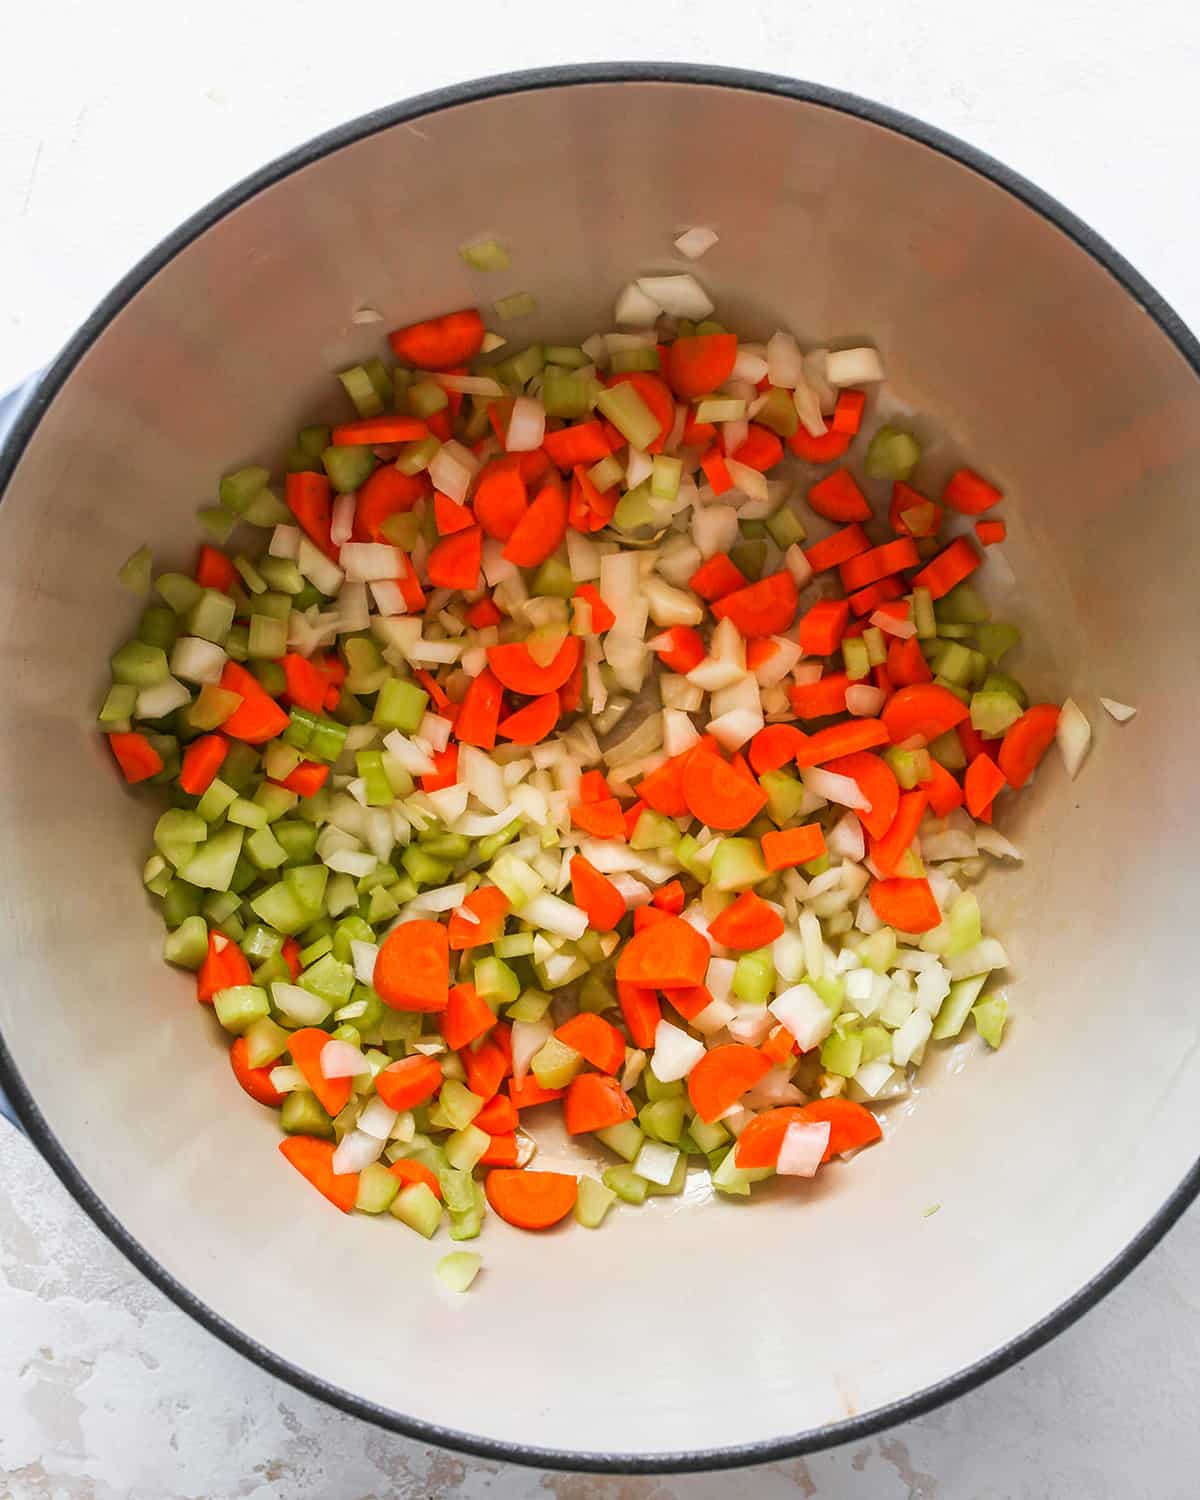 Vegetables and olive oil in a stockpot before cooking to make chicken noodle soup